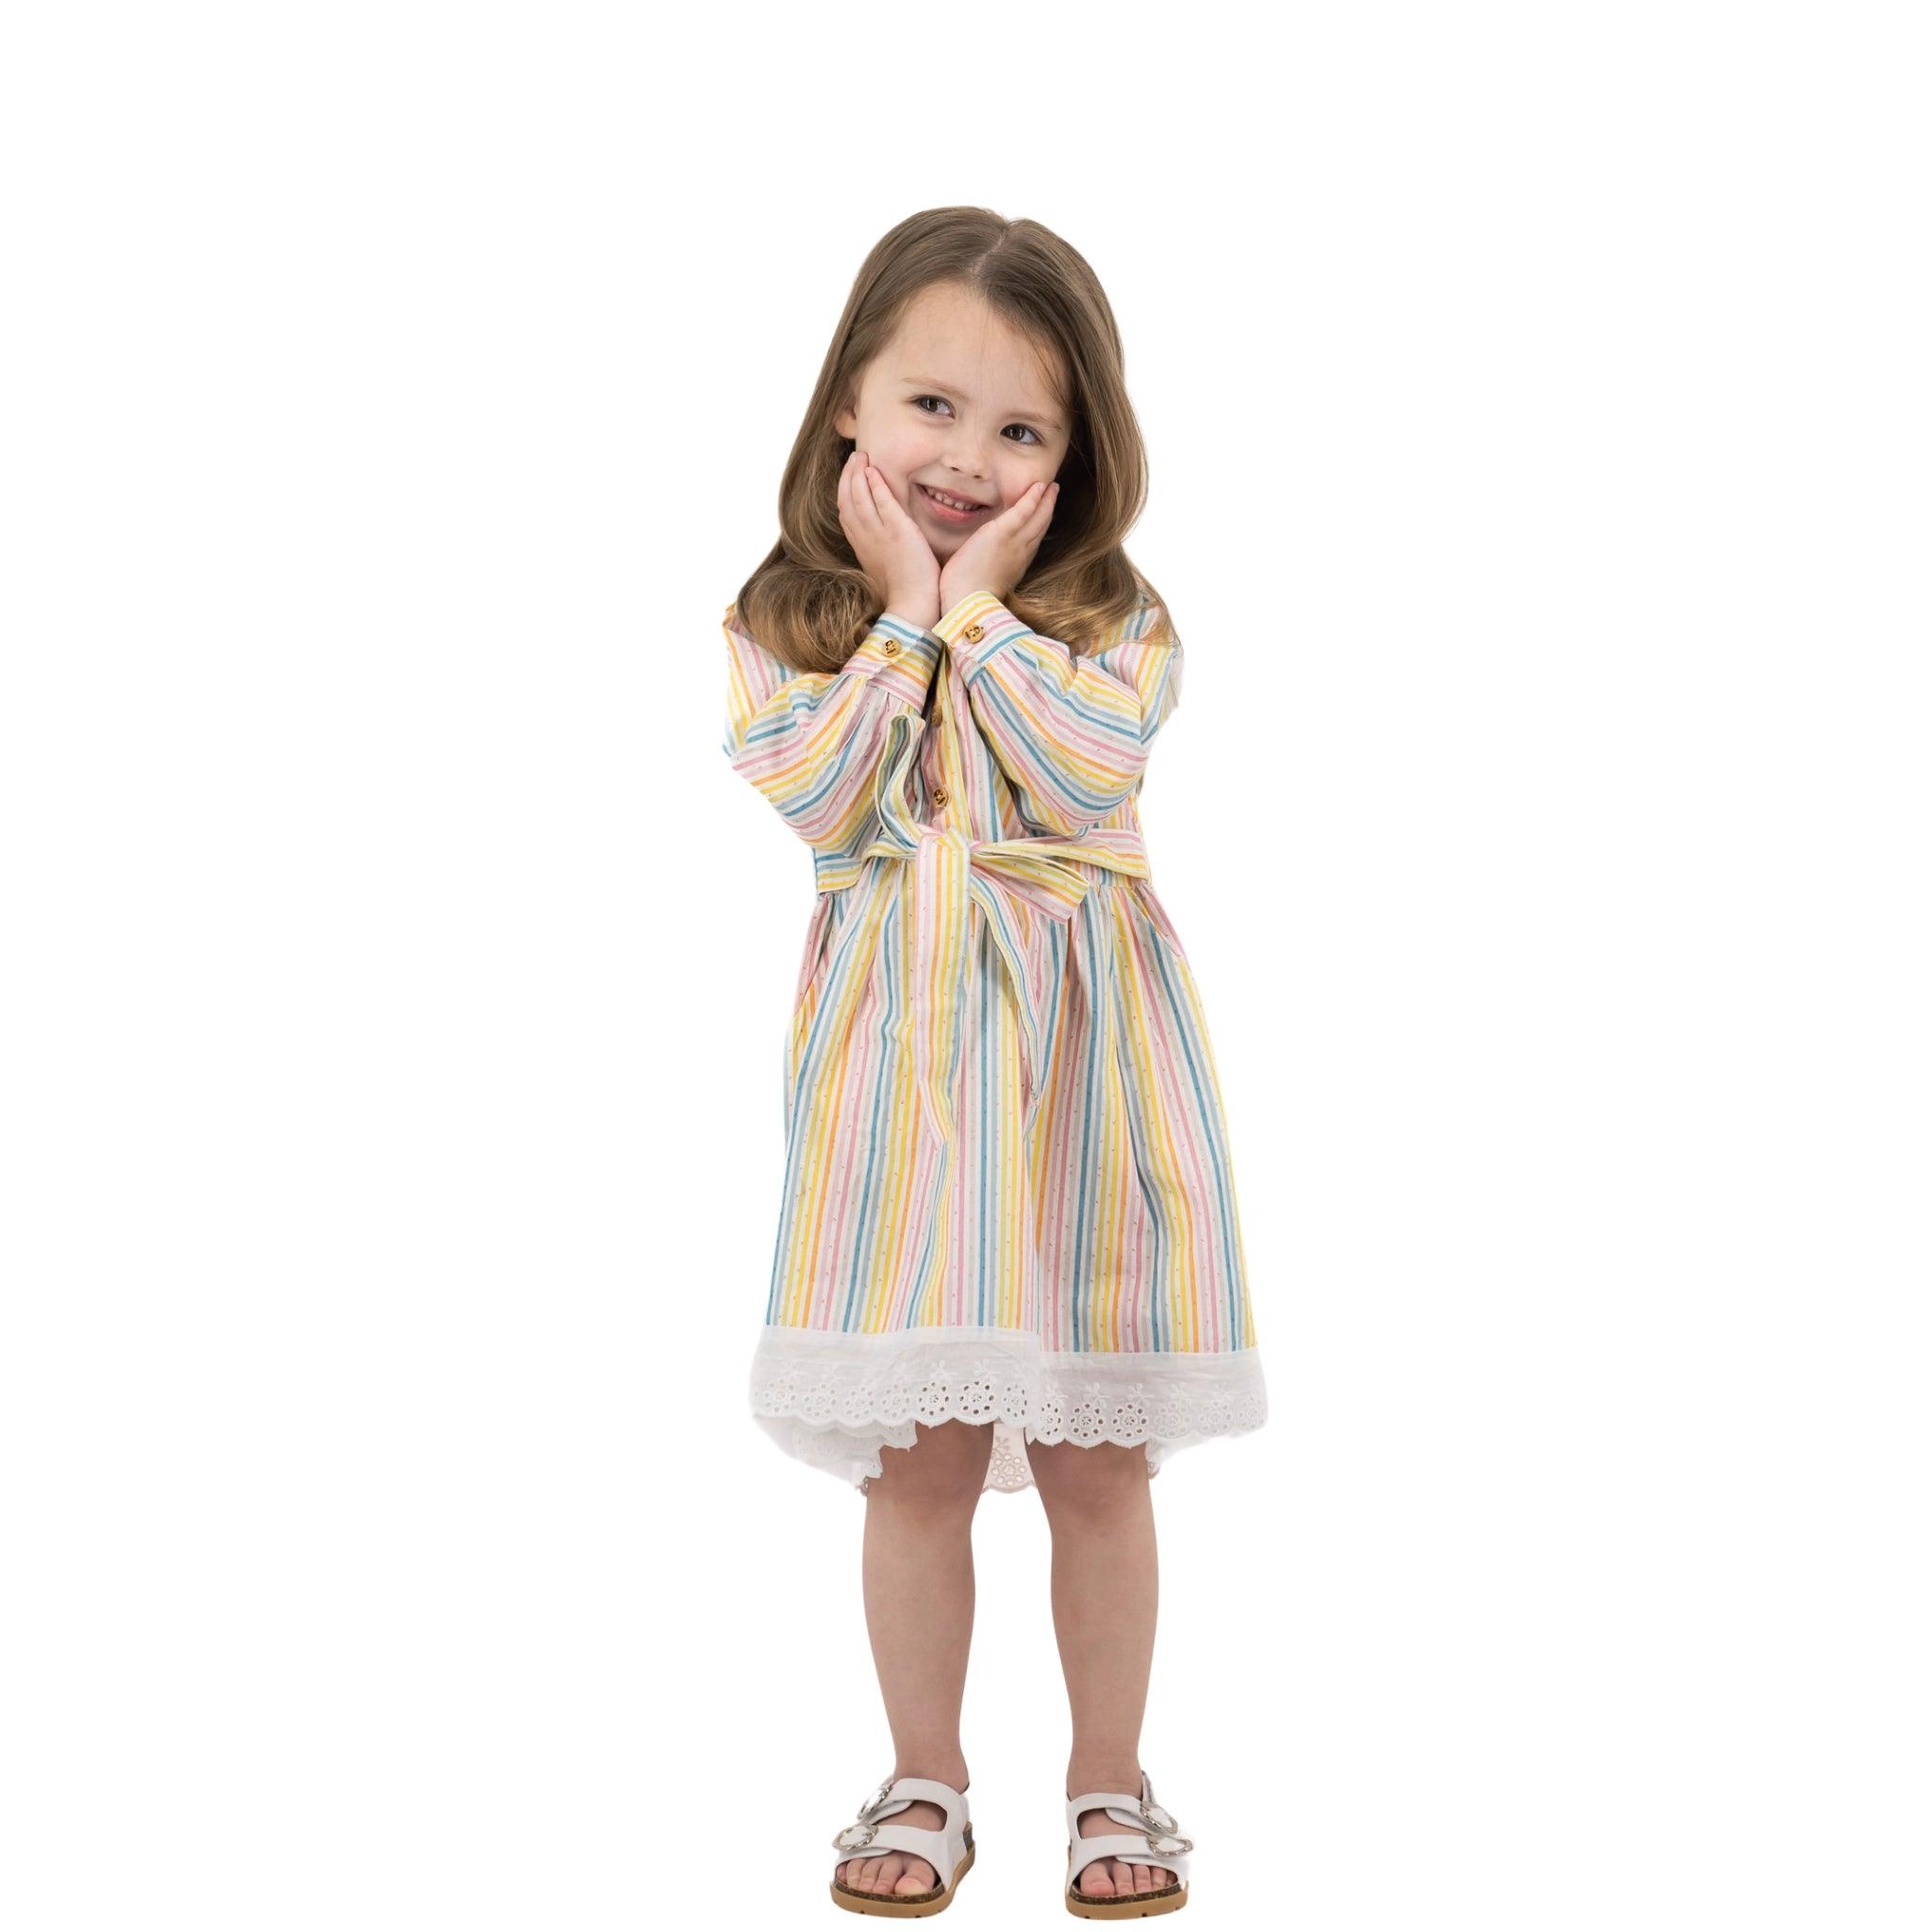 Young girl in a Karee Long Puff Sleeve White Cotton Dress with Stripes, standing and smiling with hands on cheeks, isolated on a white background.